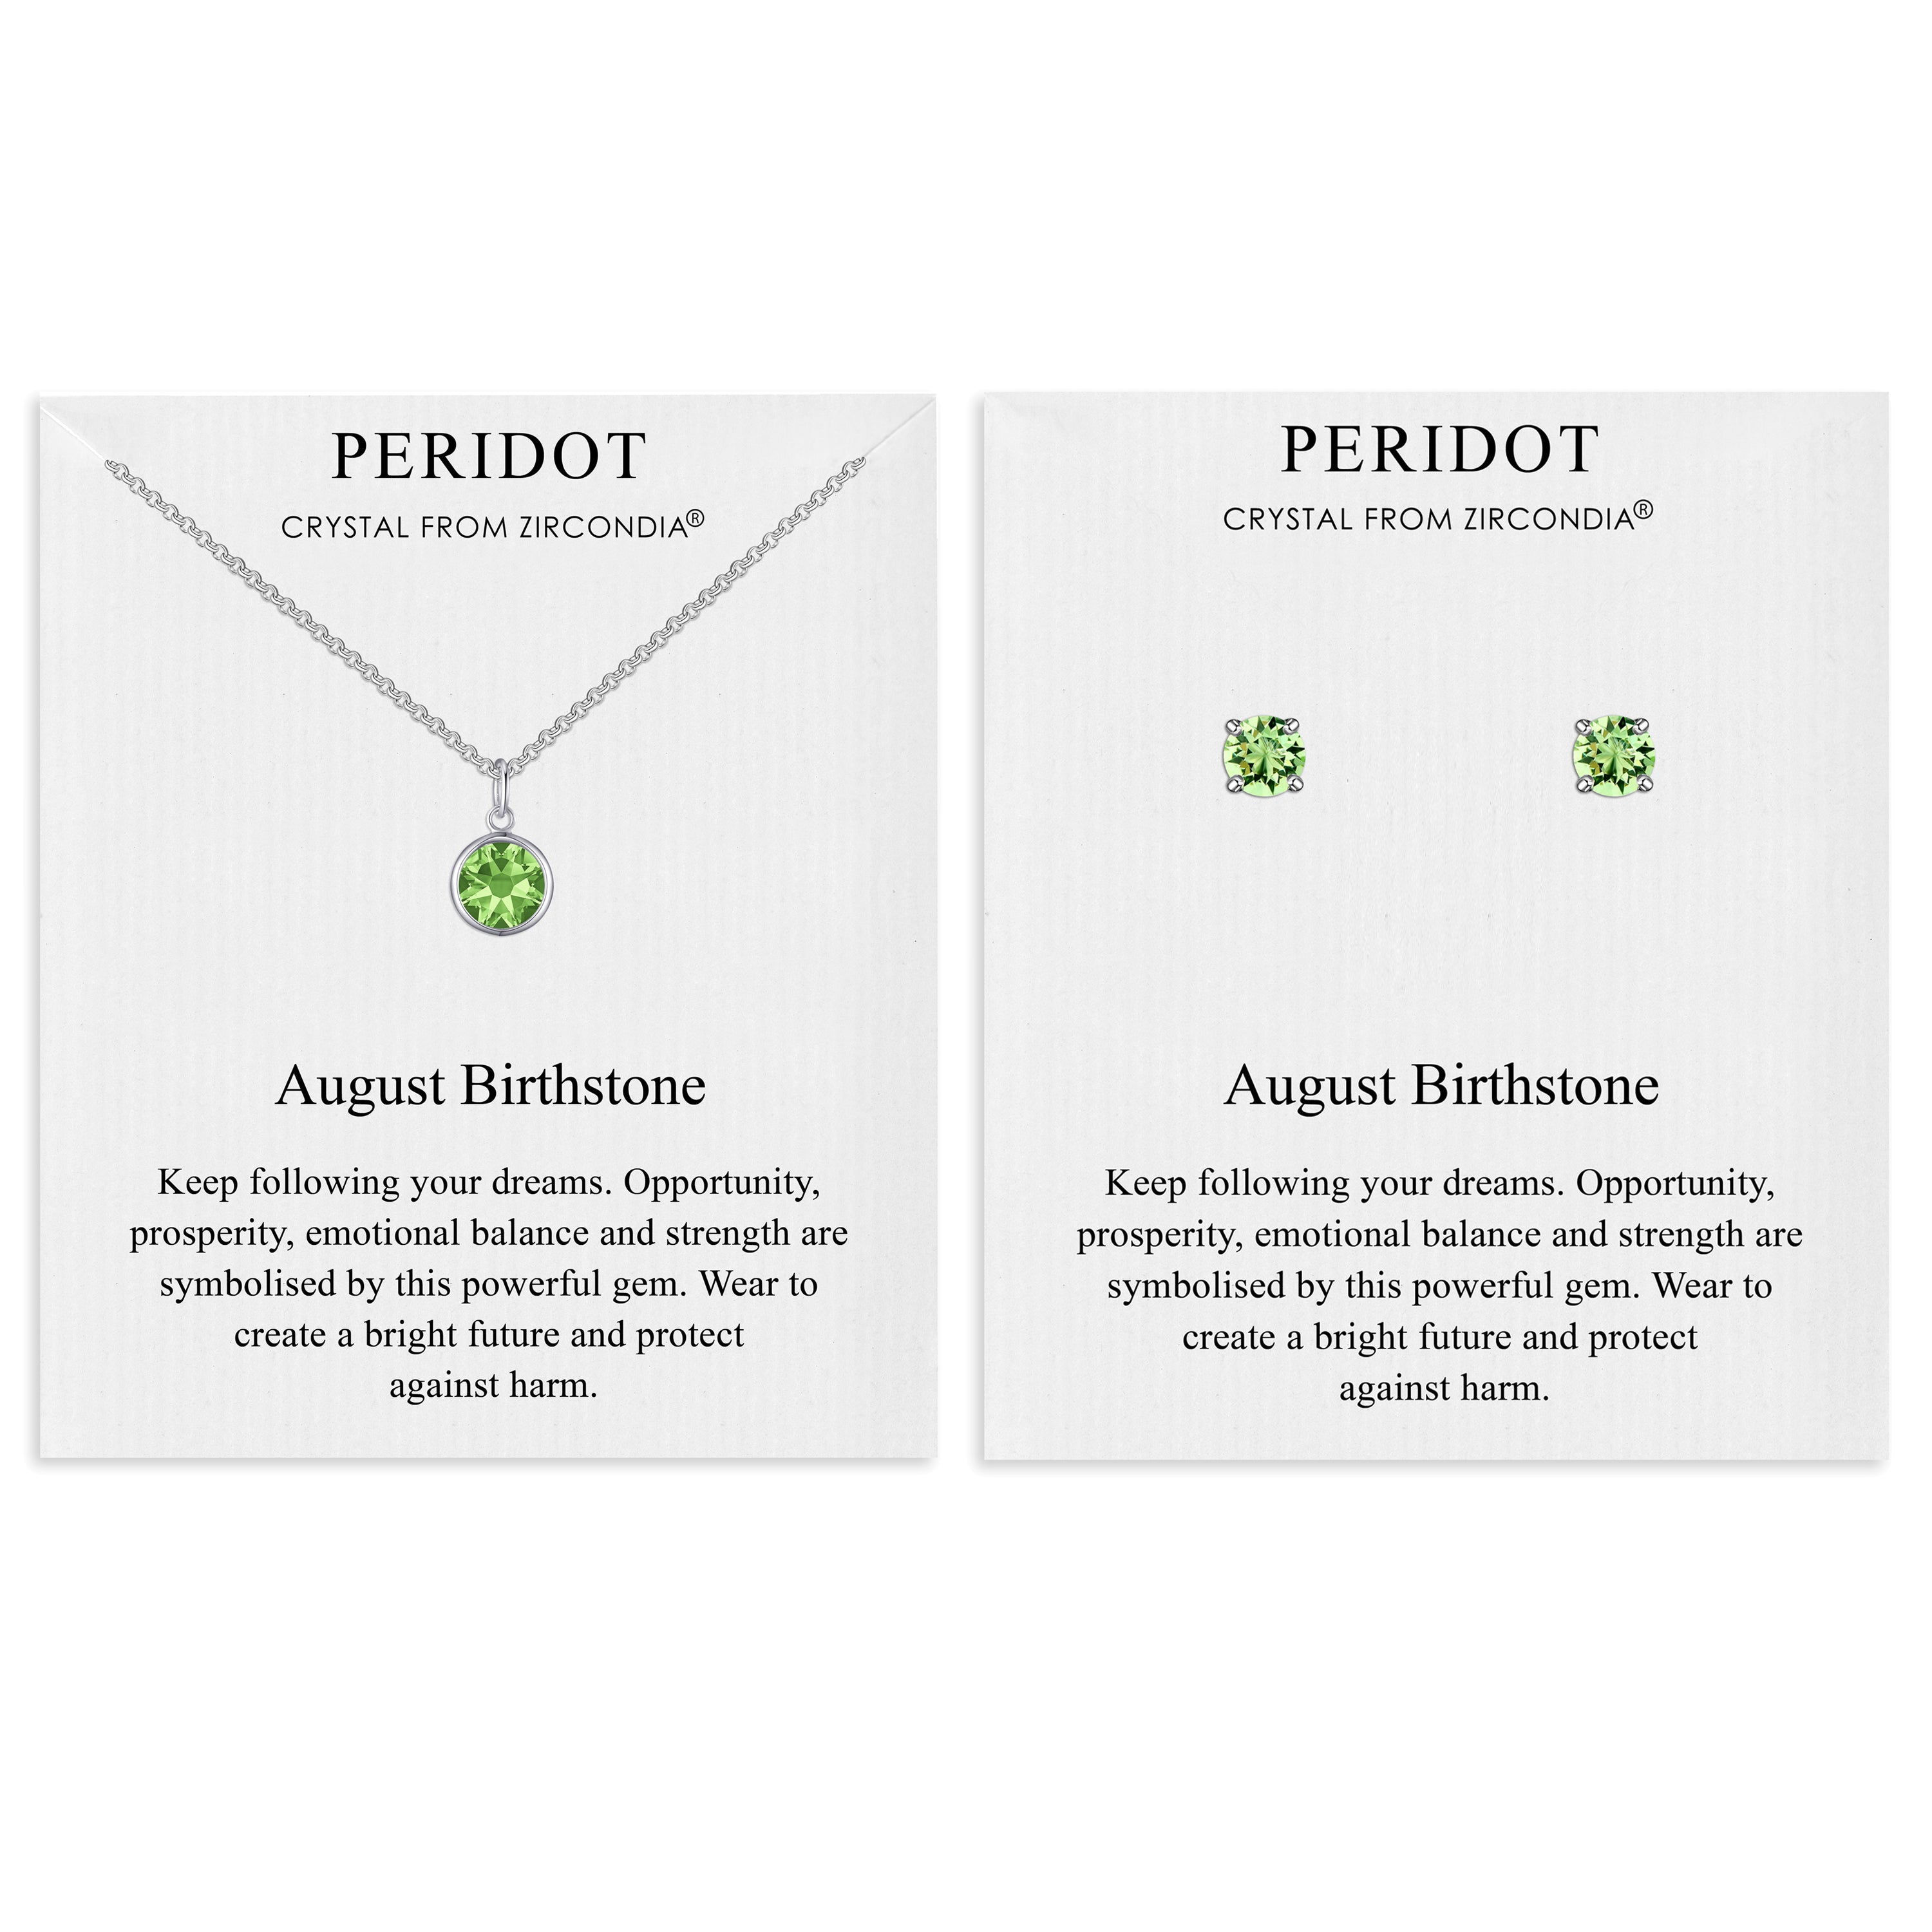 August (Peridot) Birthstone Necklace & Earrings Set Created with Zircondia® Crystals by Philip Jones Jewellery